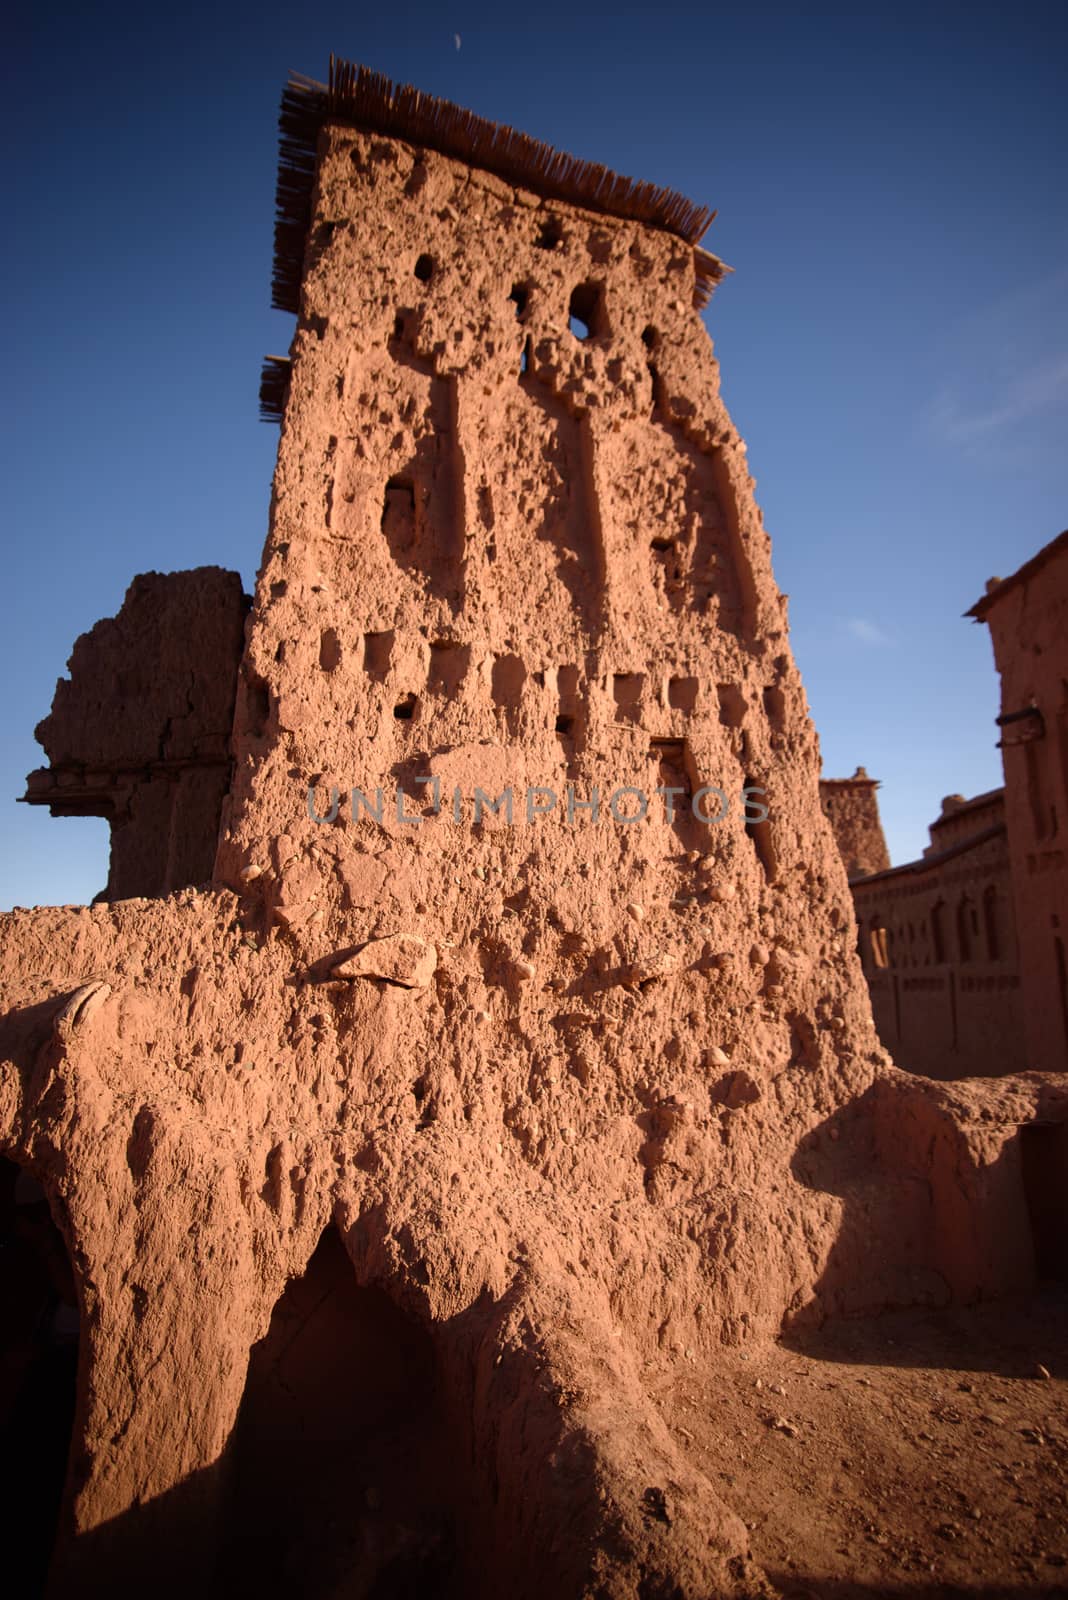 Kasbah Ait Benhaddou in the Atlas Mountains of Morocco by johnnychaos